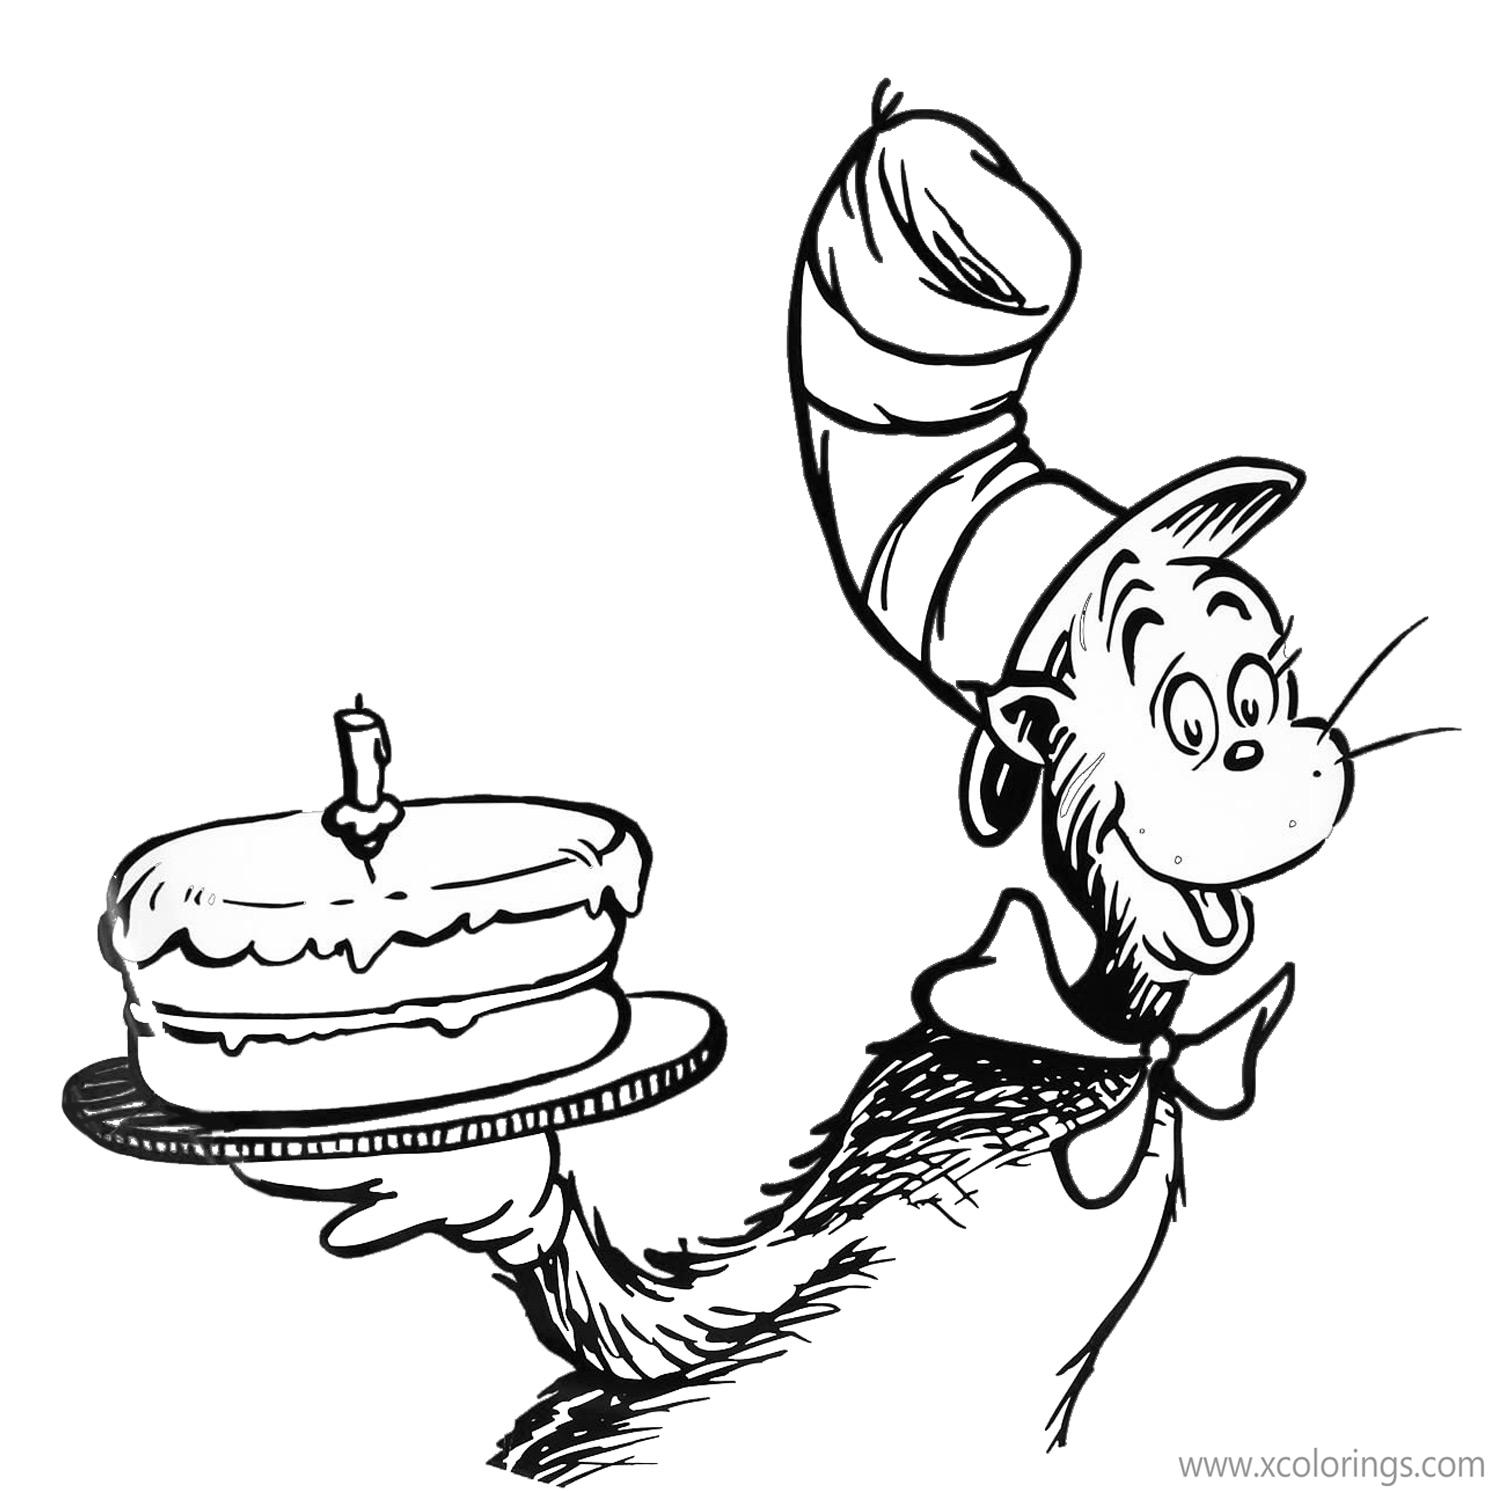 Happy Birthday to Dr Seuss Coloring Pages - XColorings.com